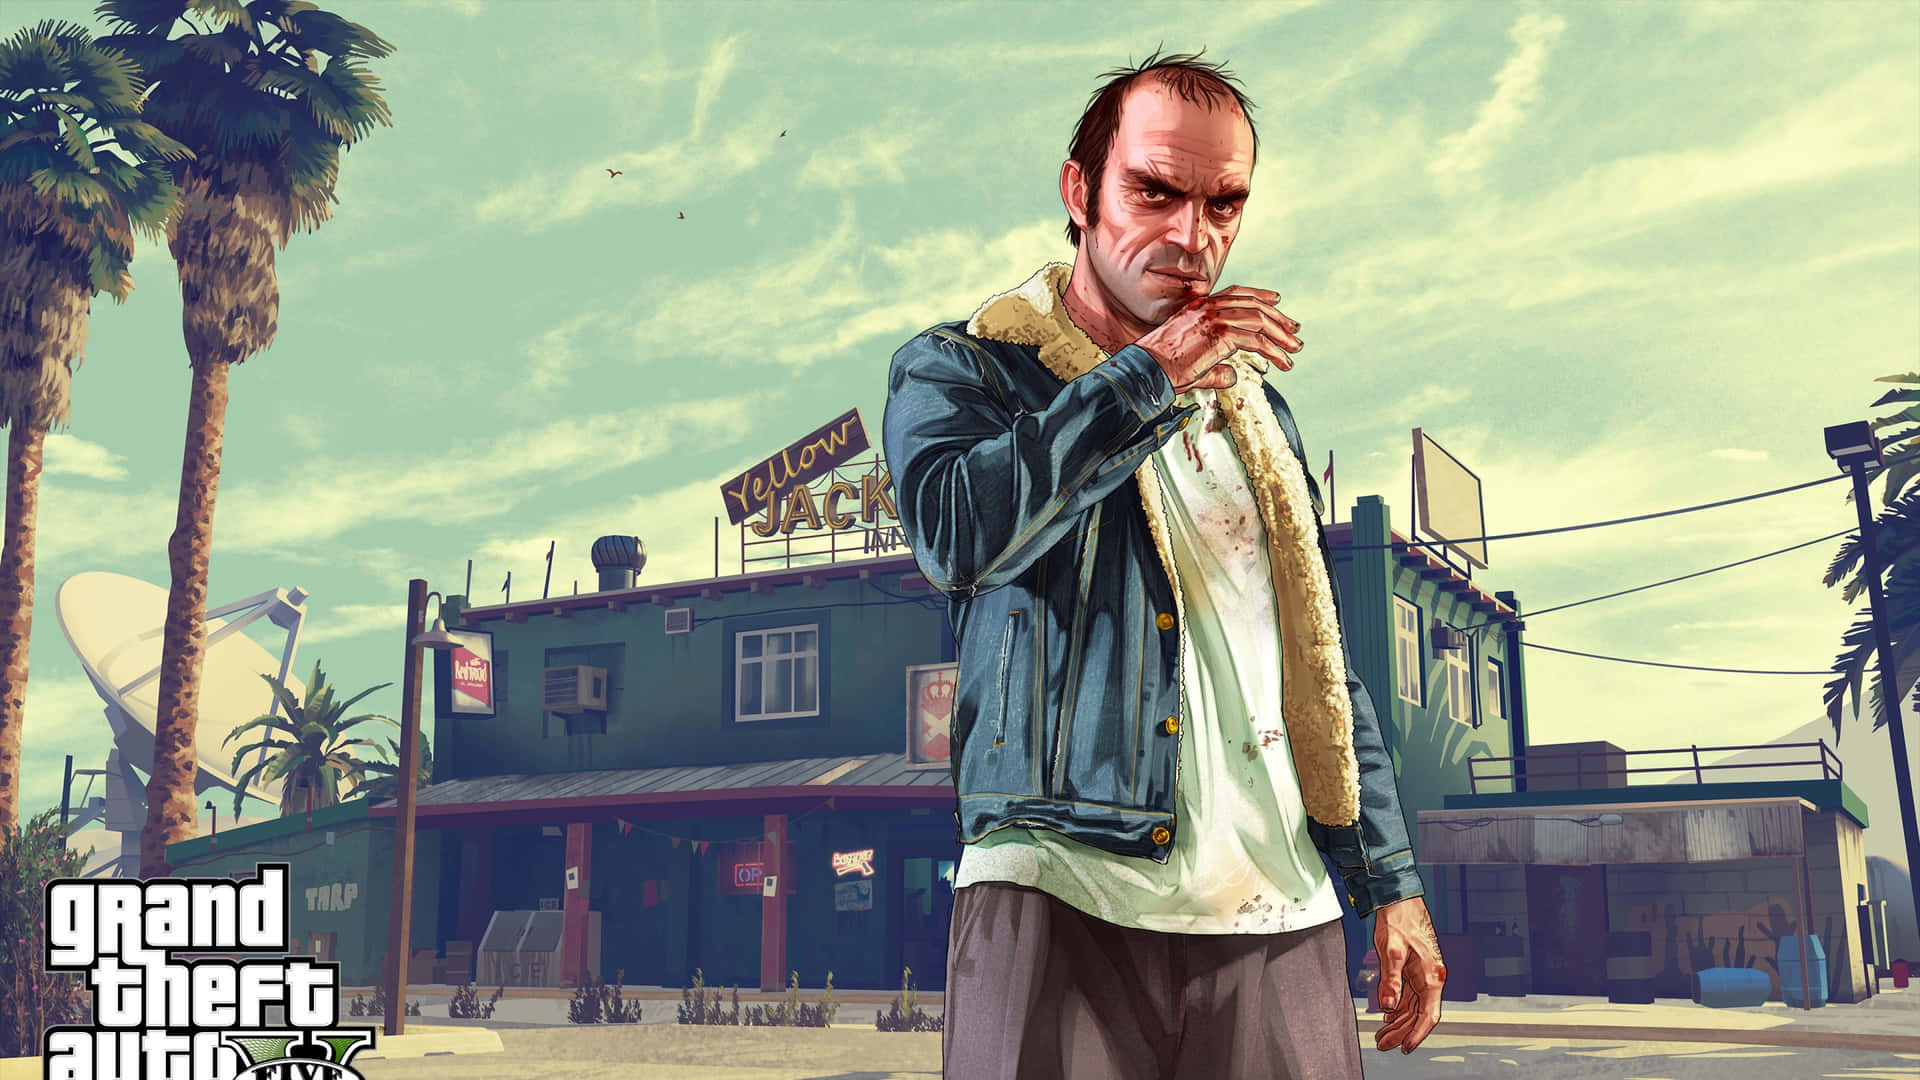 Exhilarating Action in Grand Theft Auto 5 in High Definition 4K Resolution Wallpaper